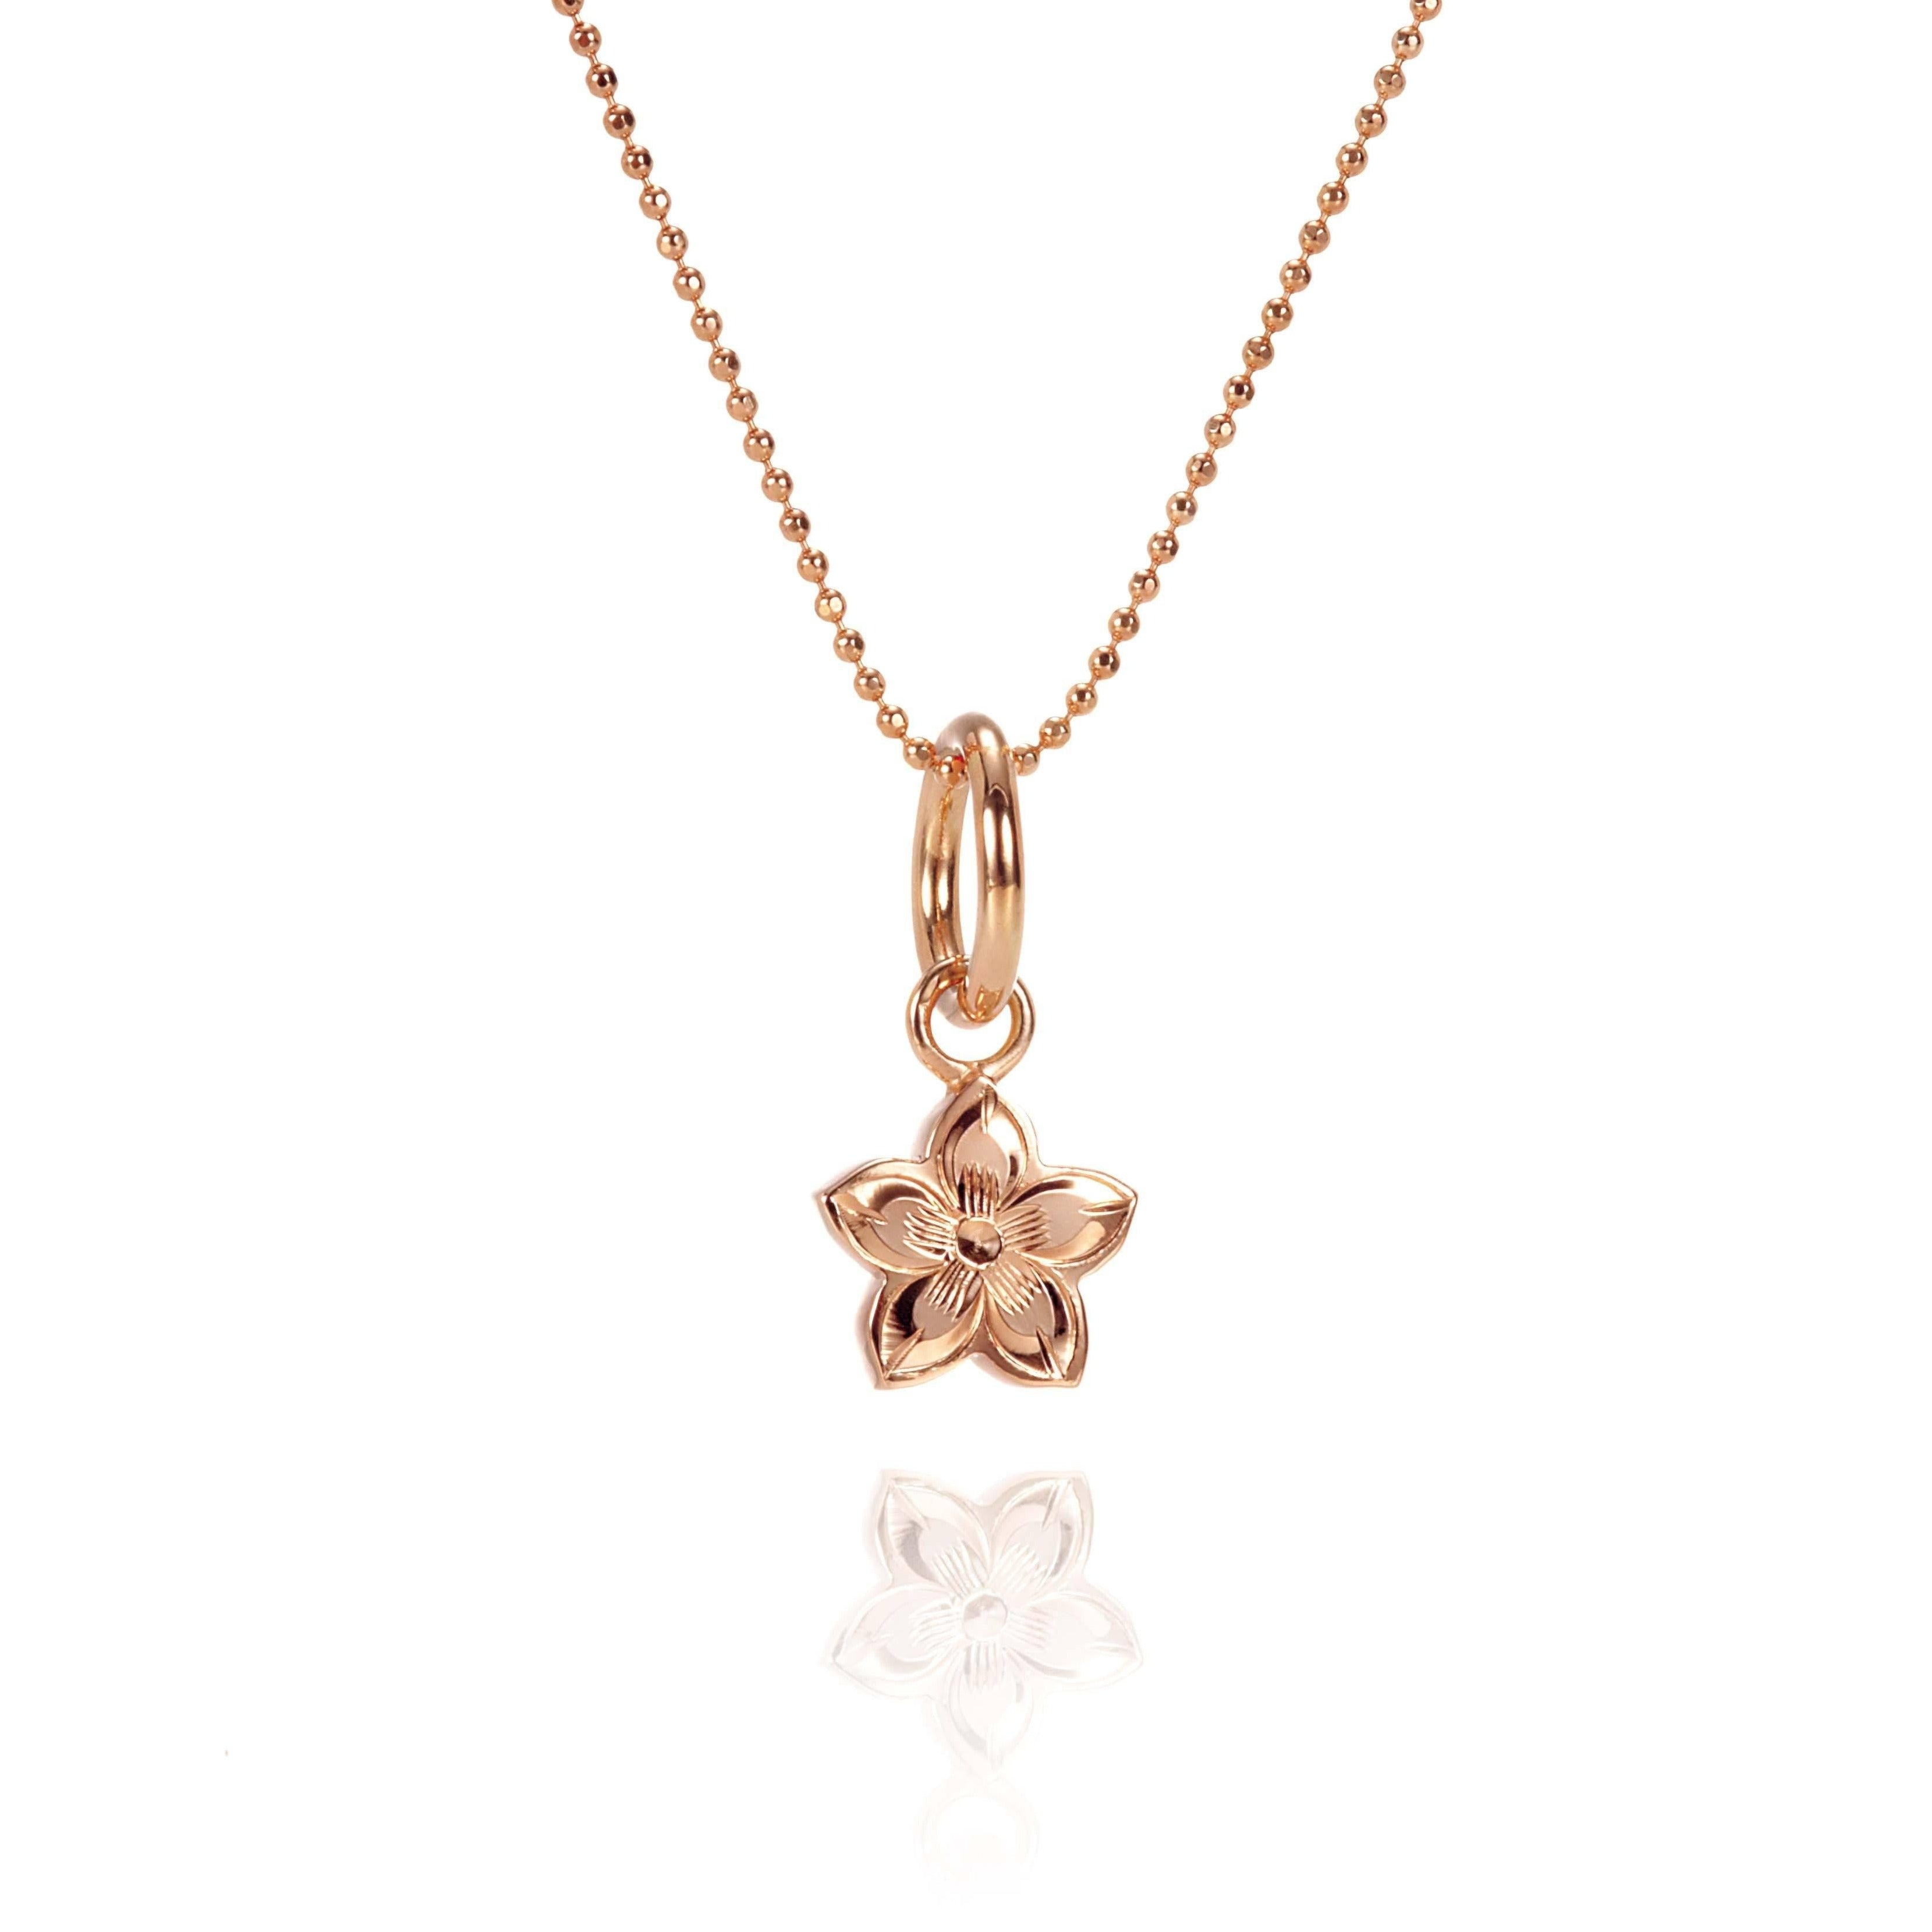 In this photo there is a rose gold plumeria pendant with hand engravings.